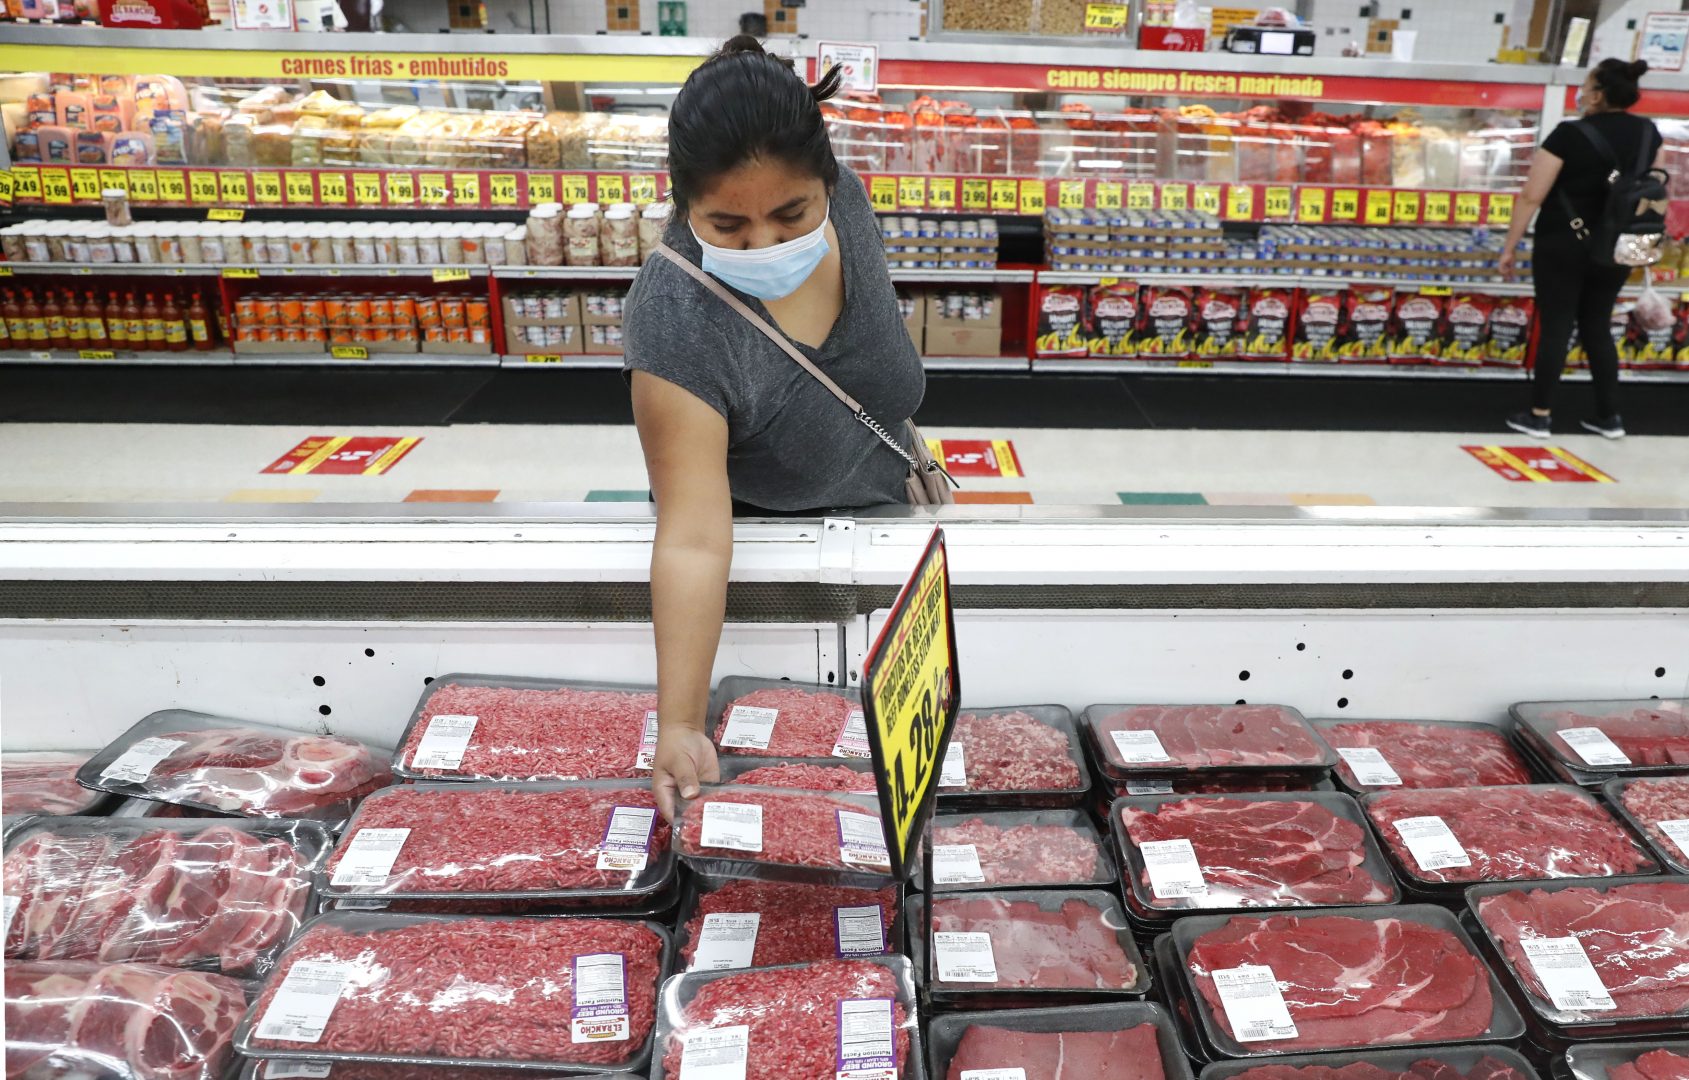 In this April 29, 2020 file photo, a shopper wears a mask as she looks over meat products at a grocery store in Dallas.   